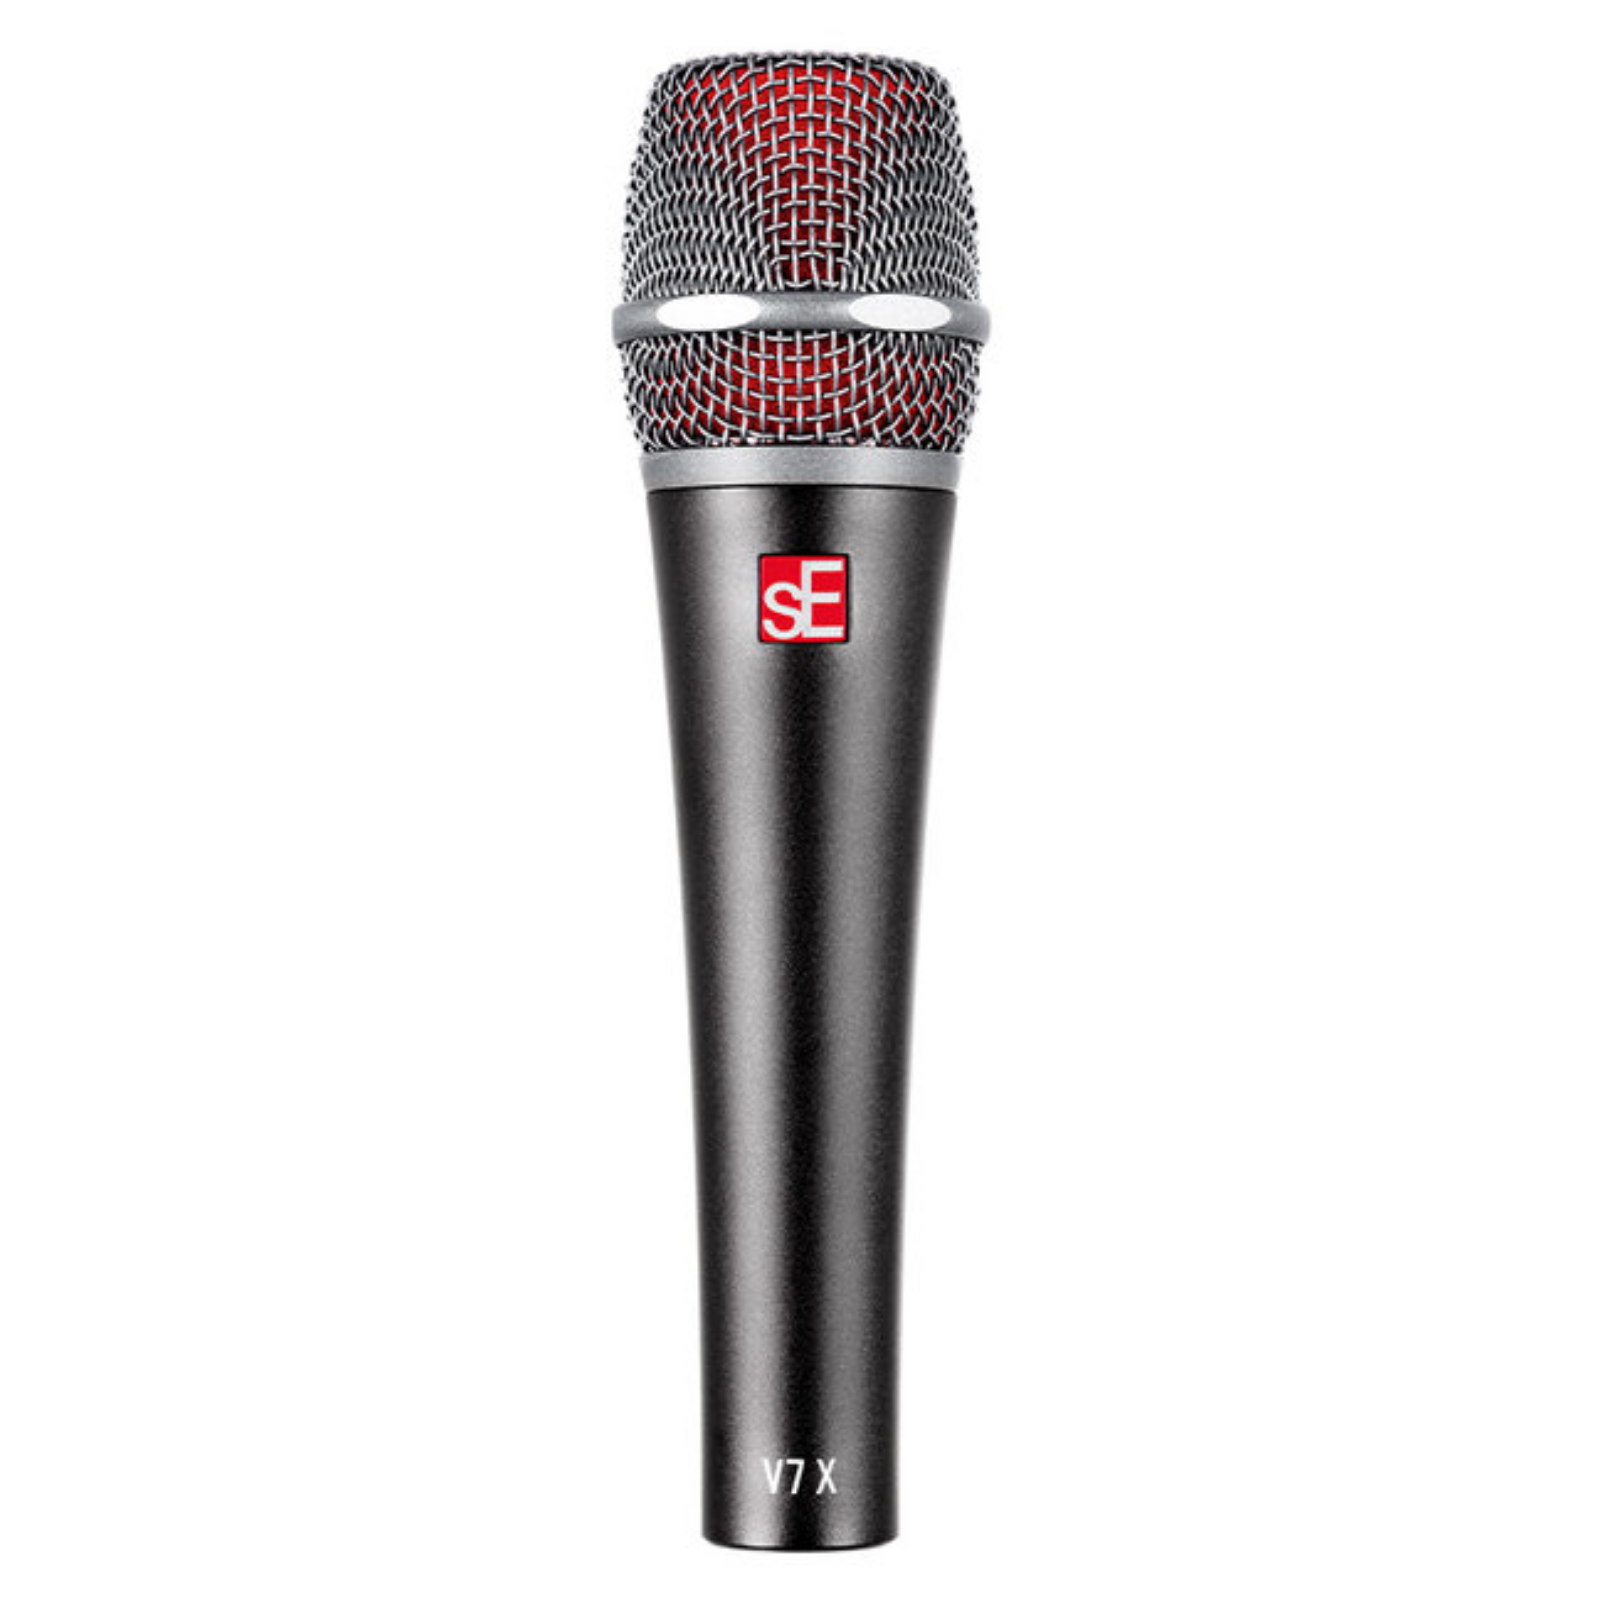 SE ELECTRONICS V7 X SUPERCARDIOID DYNAMIC INSTRUMENT MICROPHONE WITH INTEGRATED SHOCKMOUNT AND INTERNAL WINDSCREEN, SE ELECTRONICS, INSTRUMENT MICROPHONE, se-electronics-instrument-microphone, ZOSO MUSIC SDN BHD